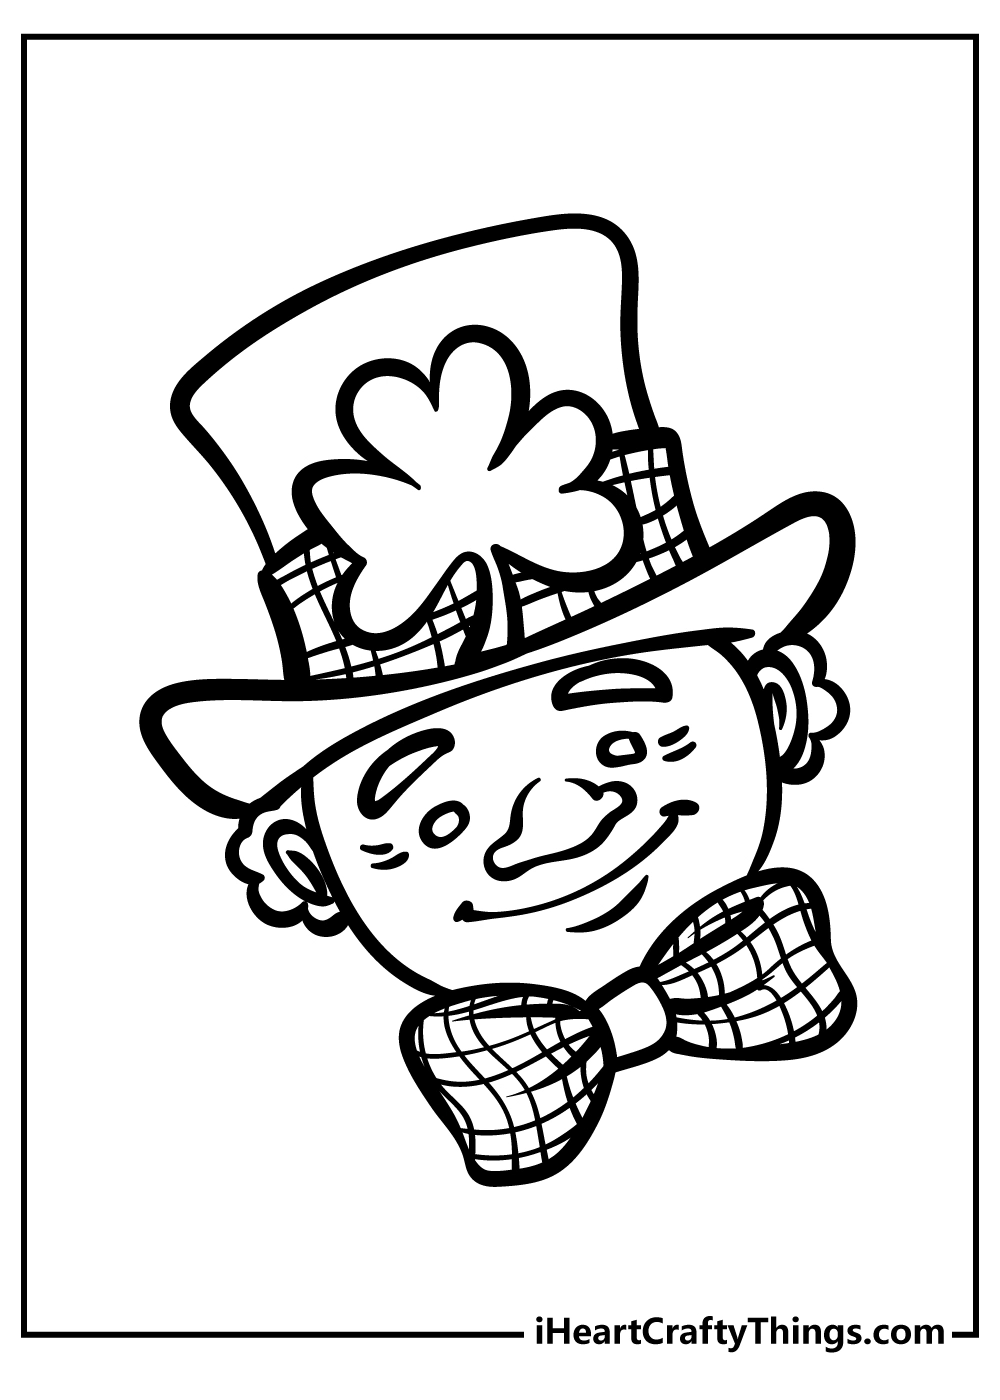 st patrick's day coloring pages